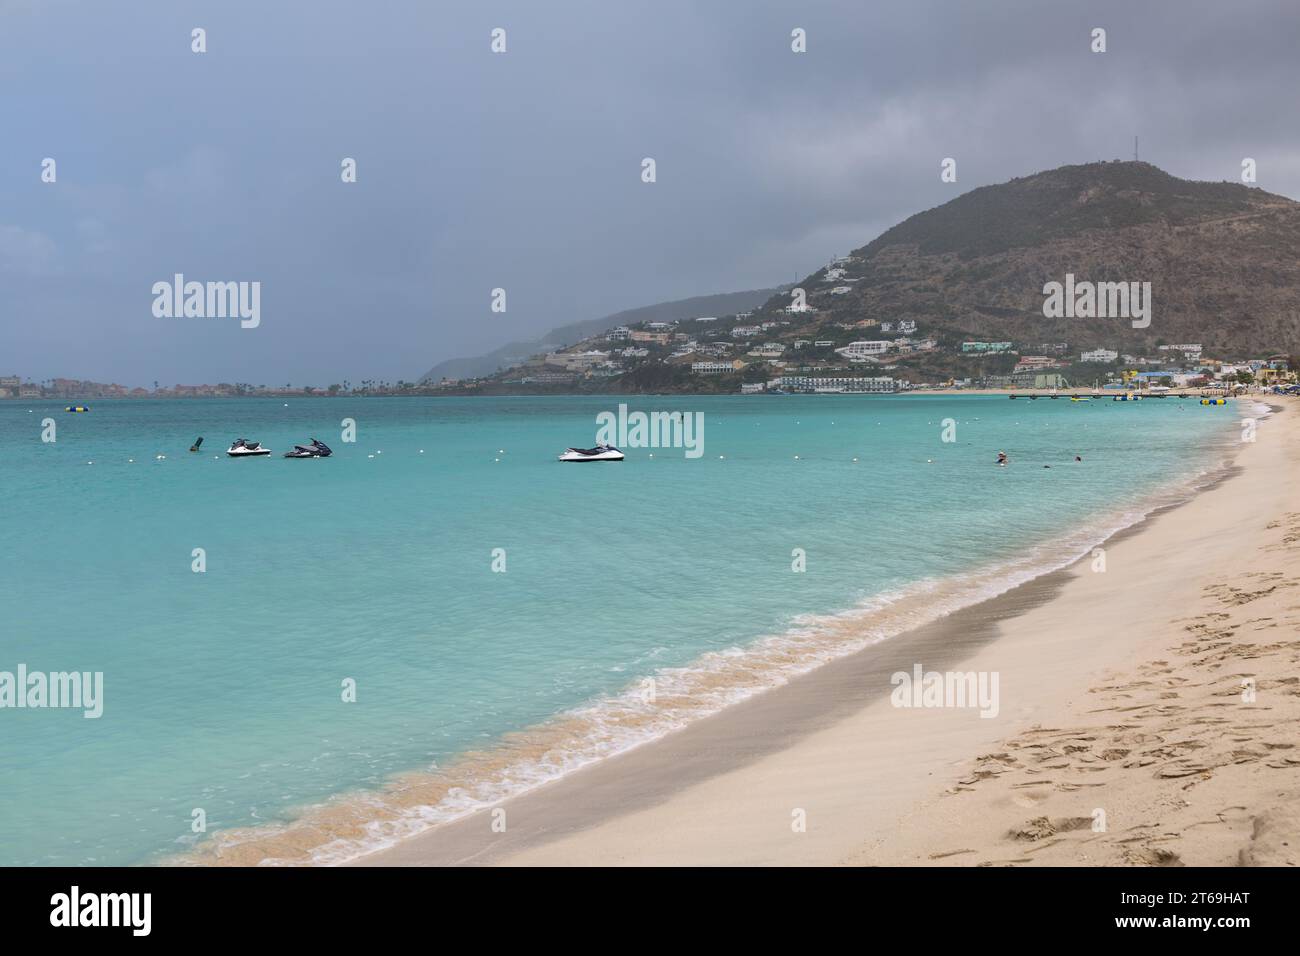 Empty beach on a rainy morning at the port of Phillipsburg, St. Maarten in the Caribbean Stock Photo